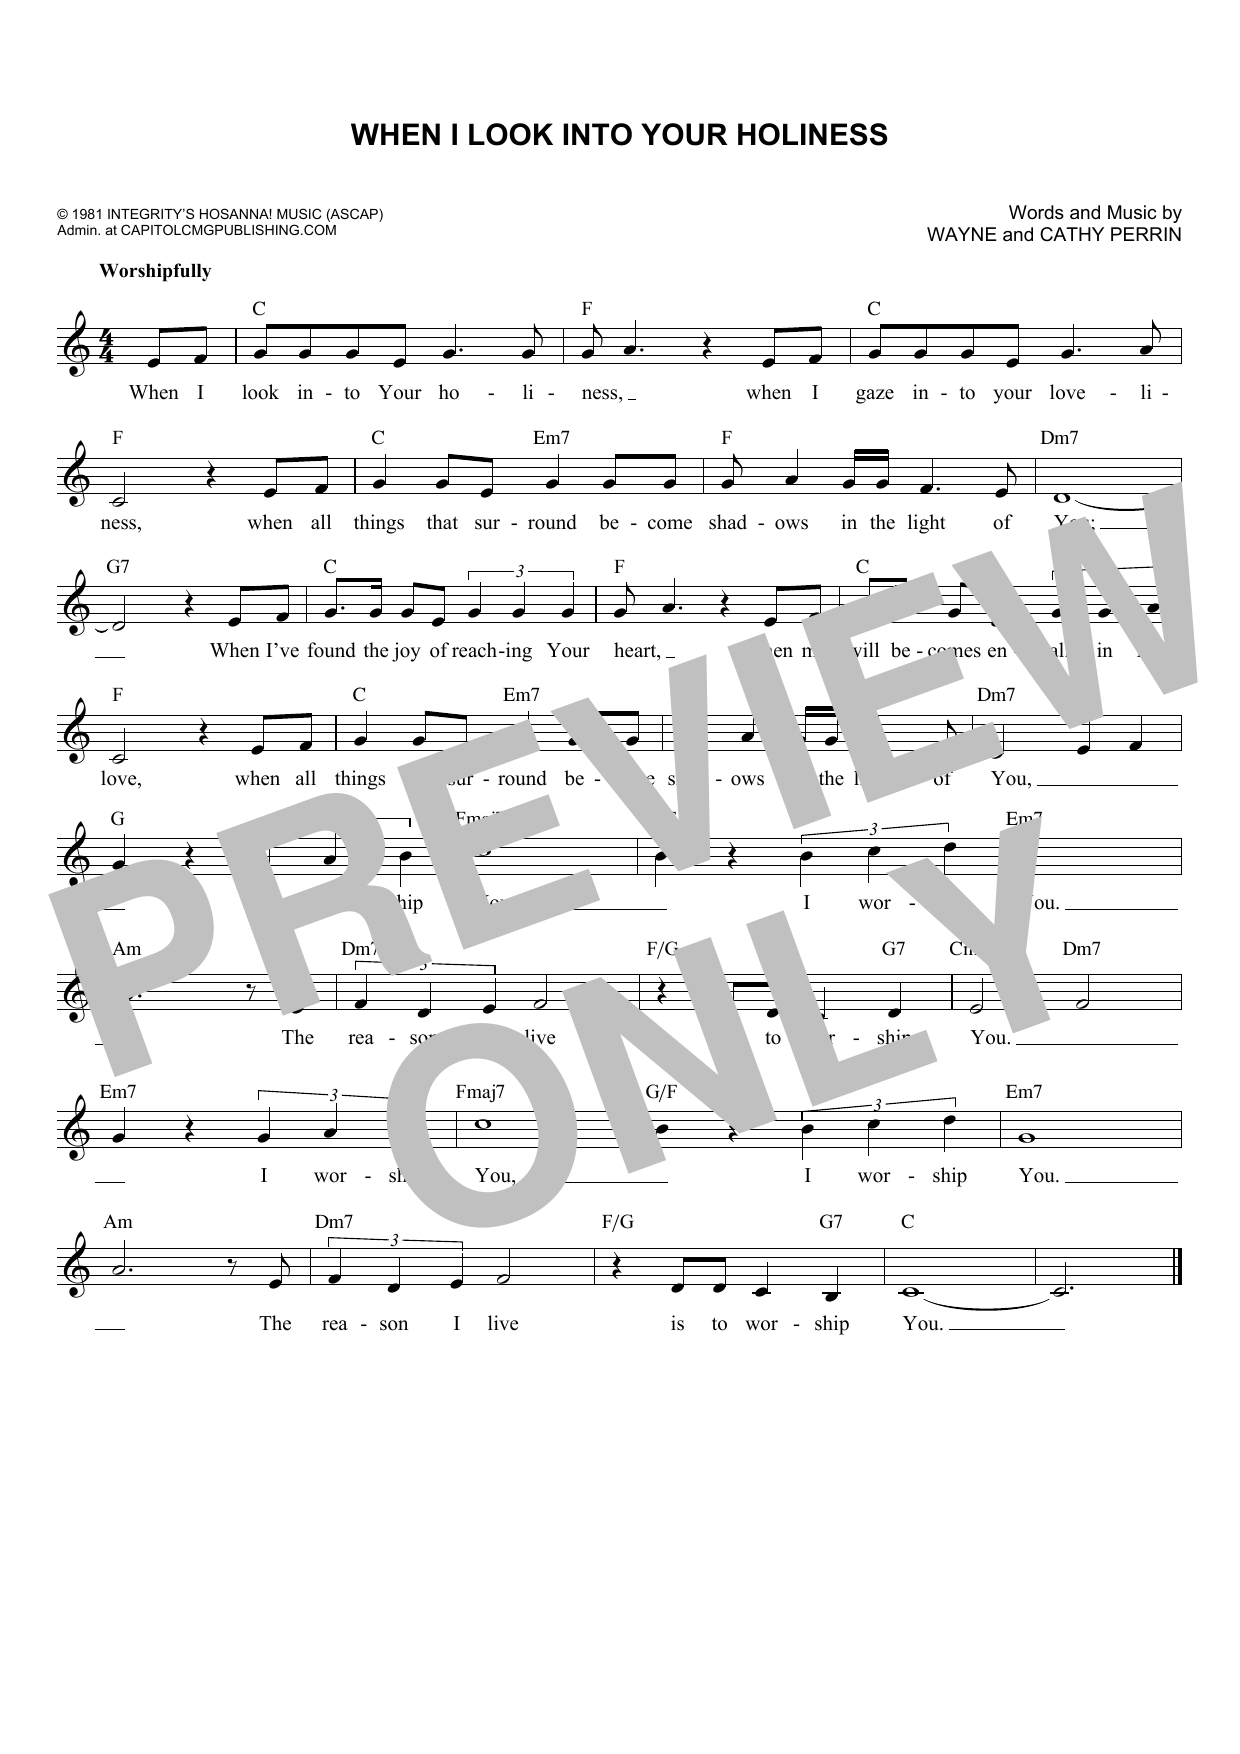 Download Wayne Perrin When I Look Into Your Holiness Sheet Music